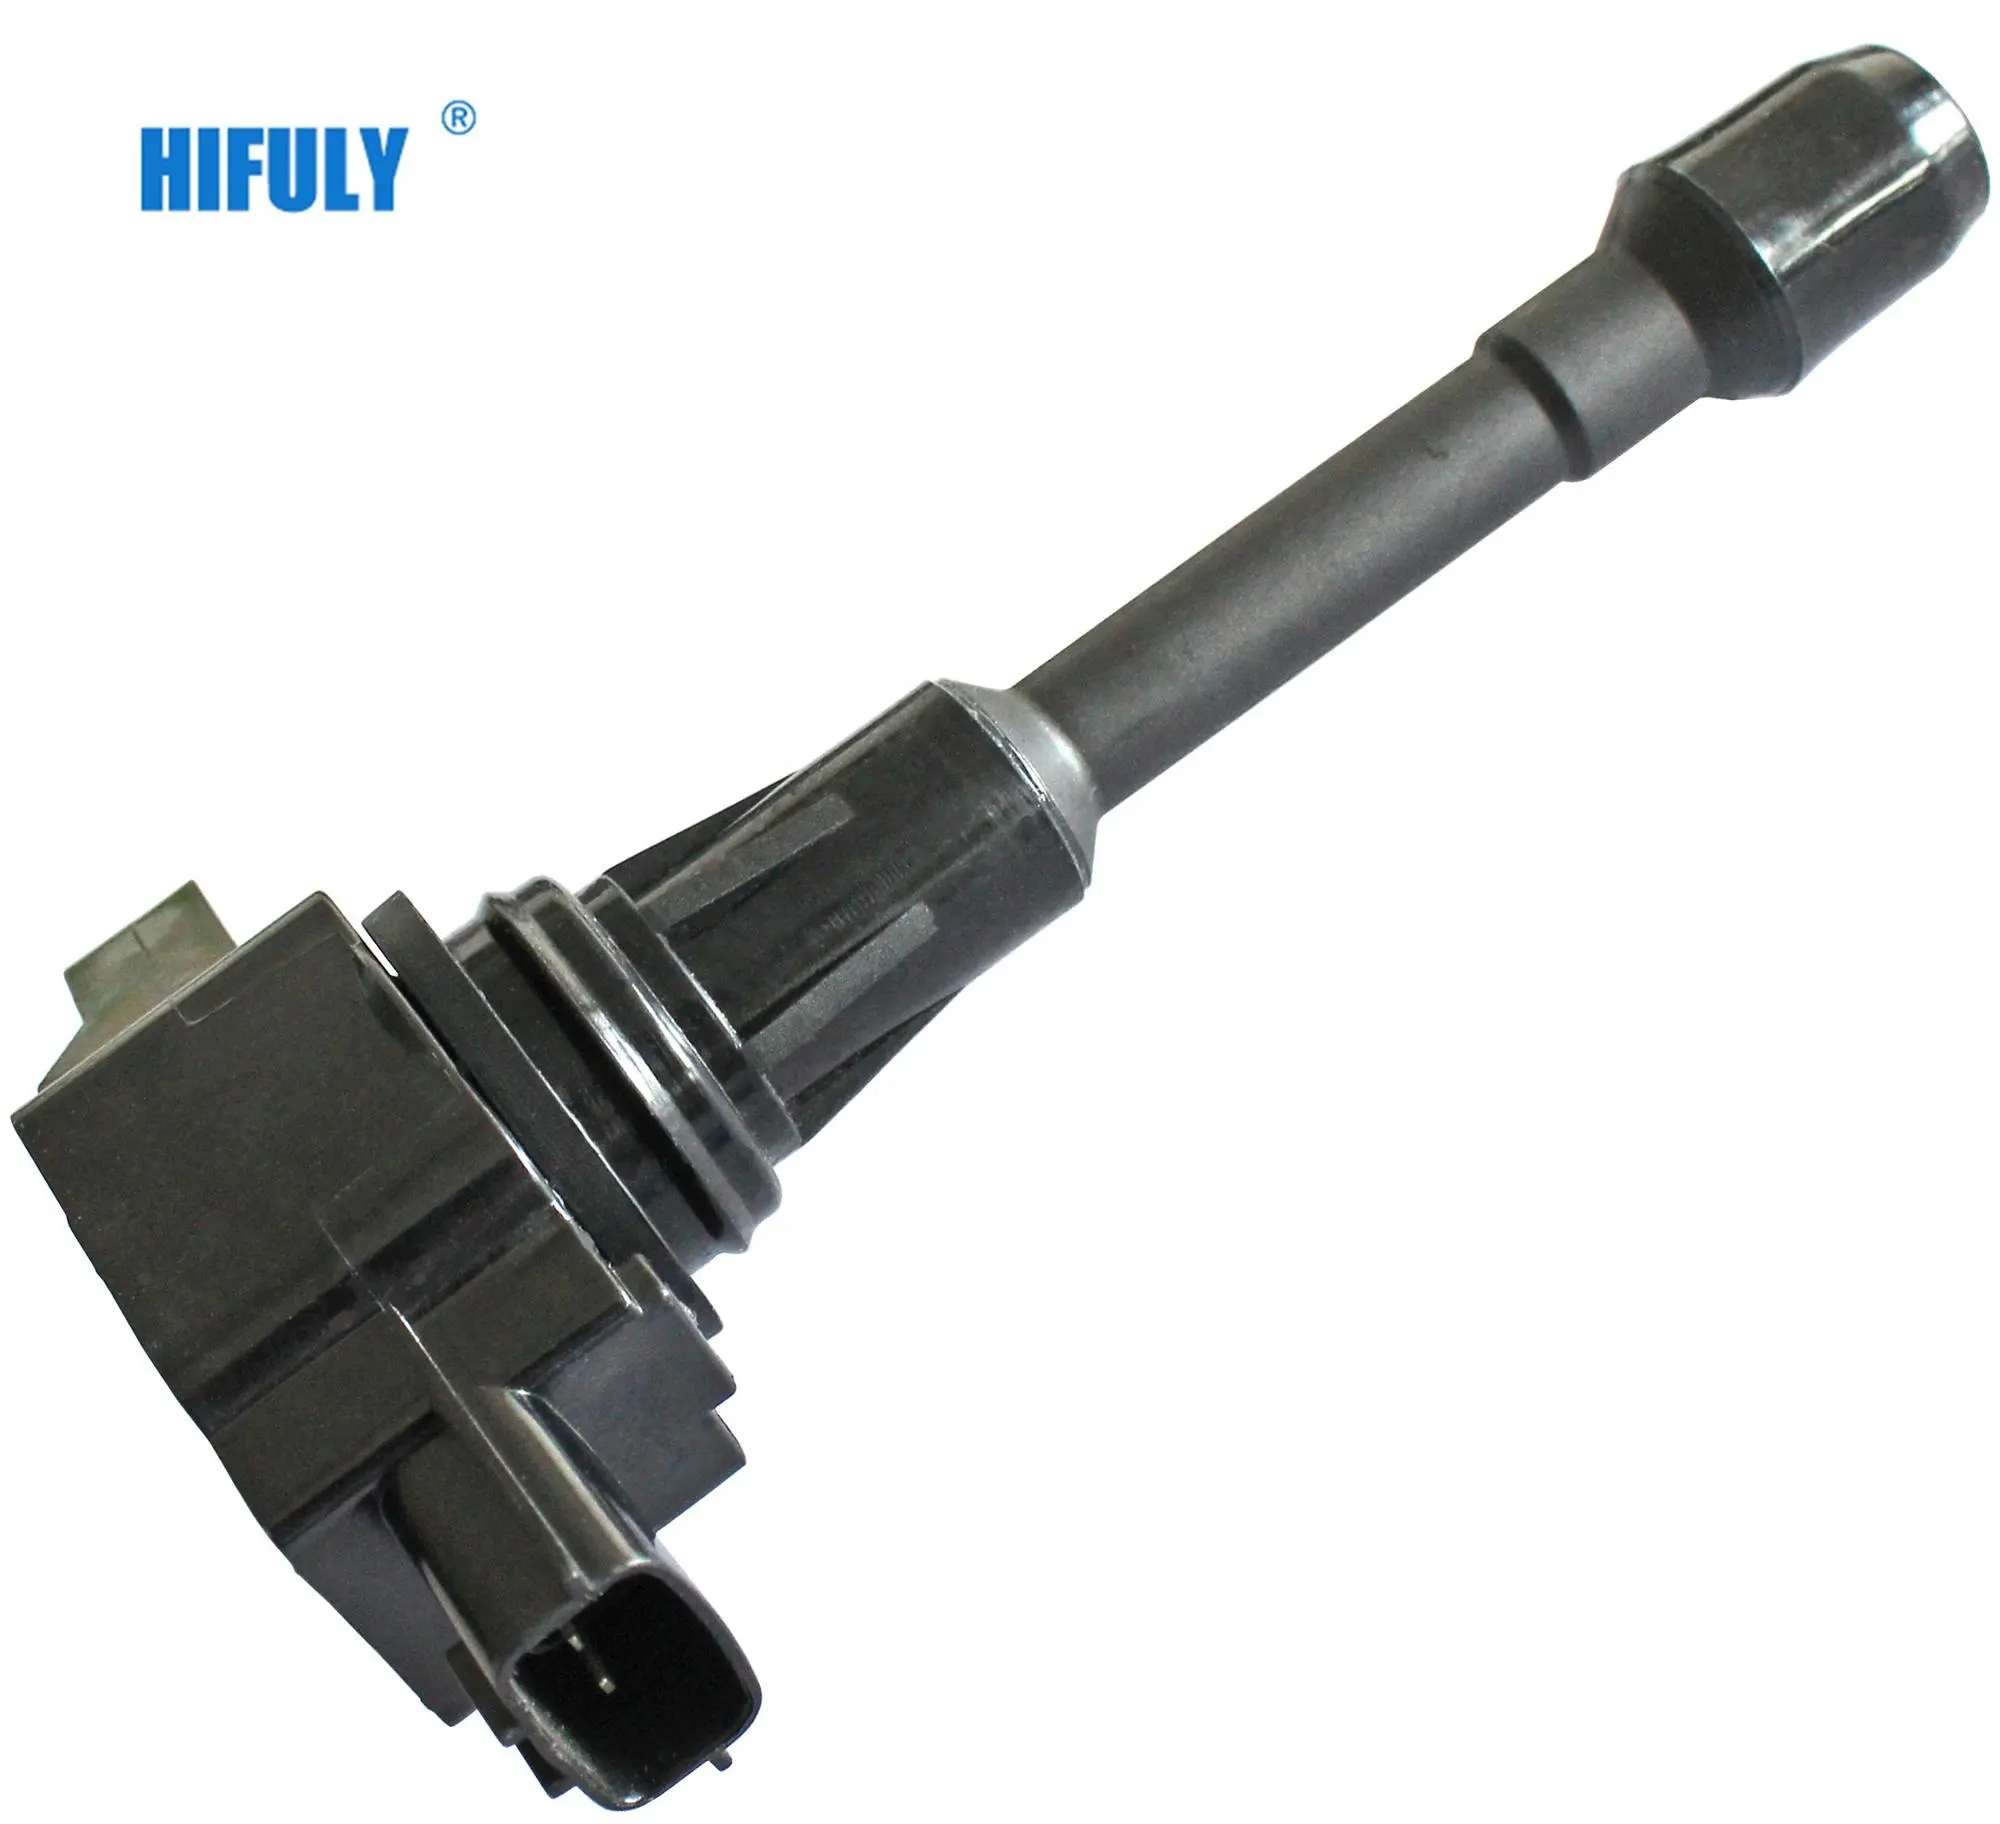 22448-JA00C 22448 jf00b 22448-ED000 different types of engine oe-quality ignition coil